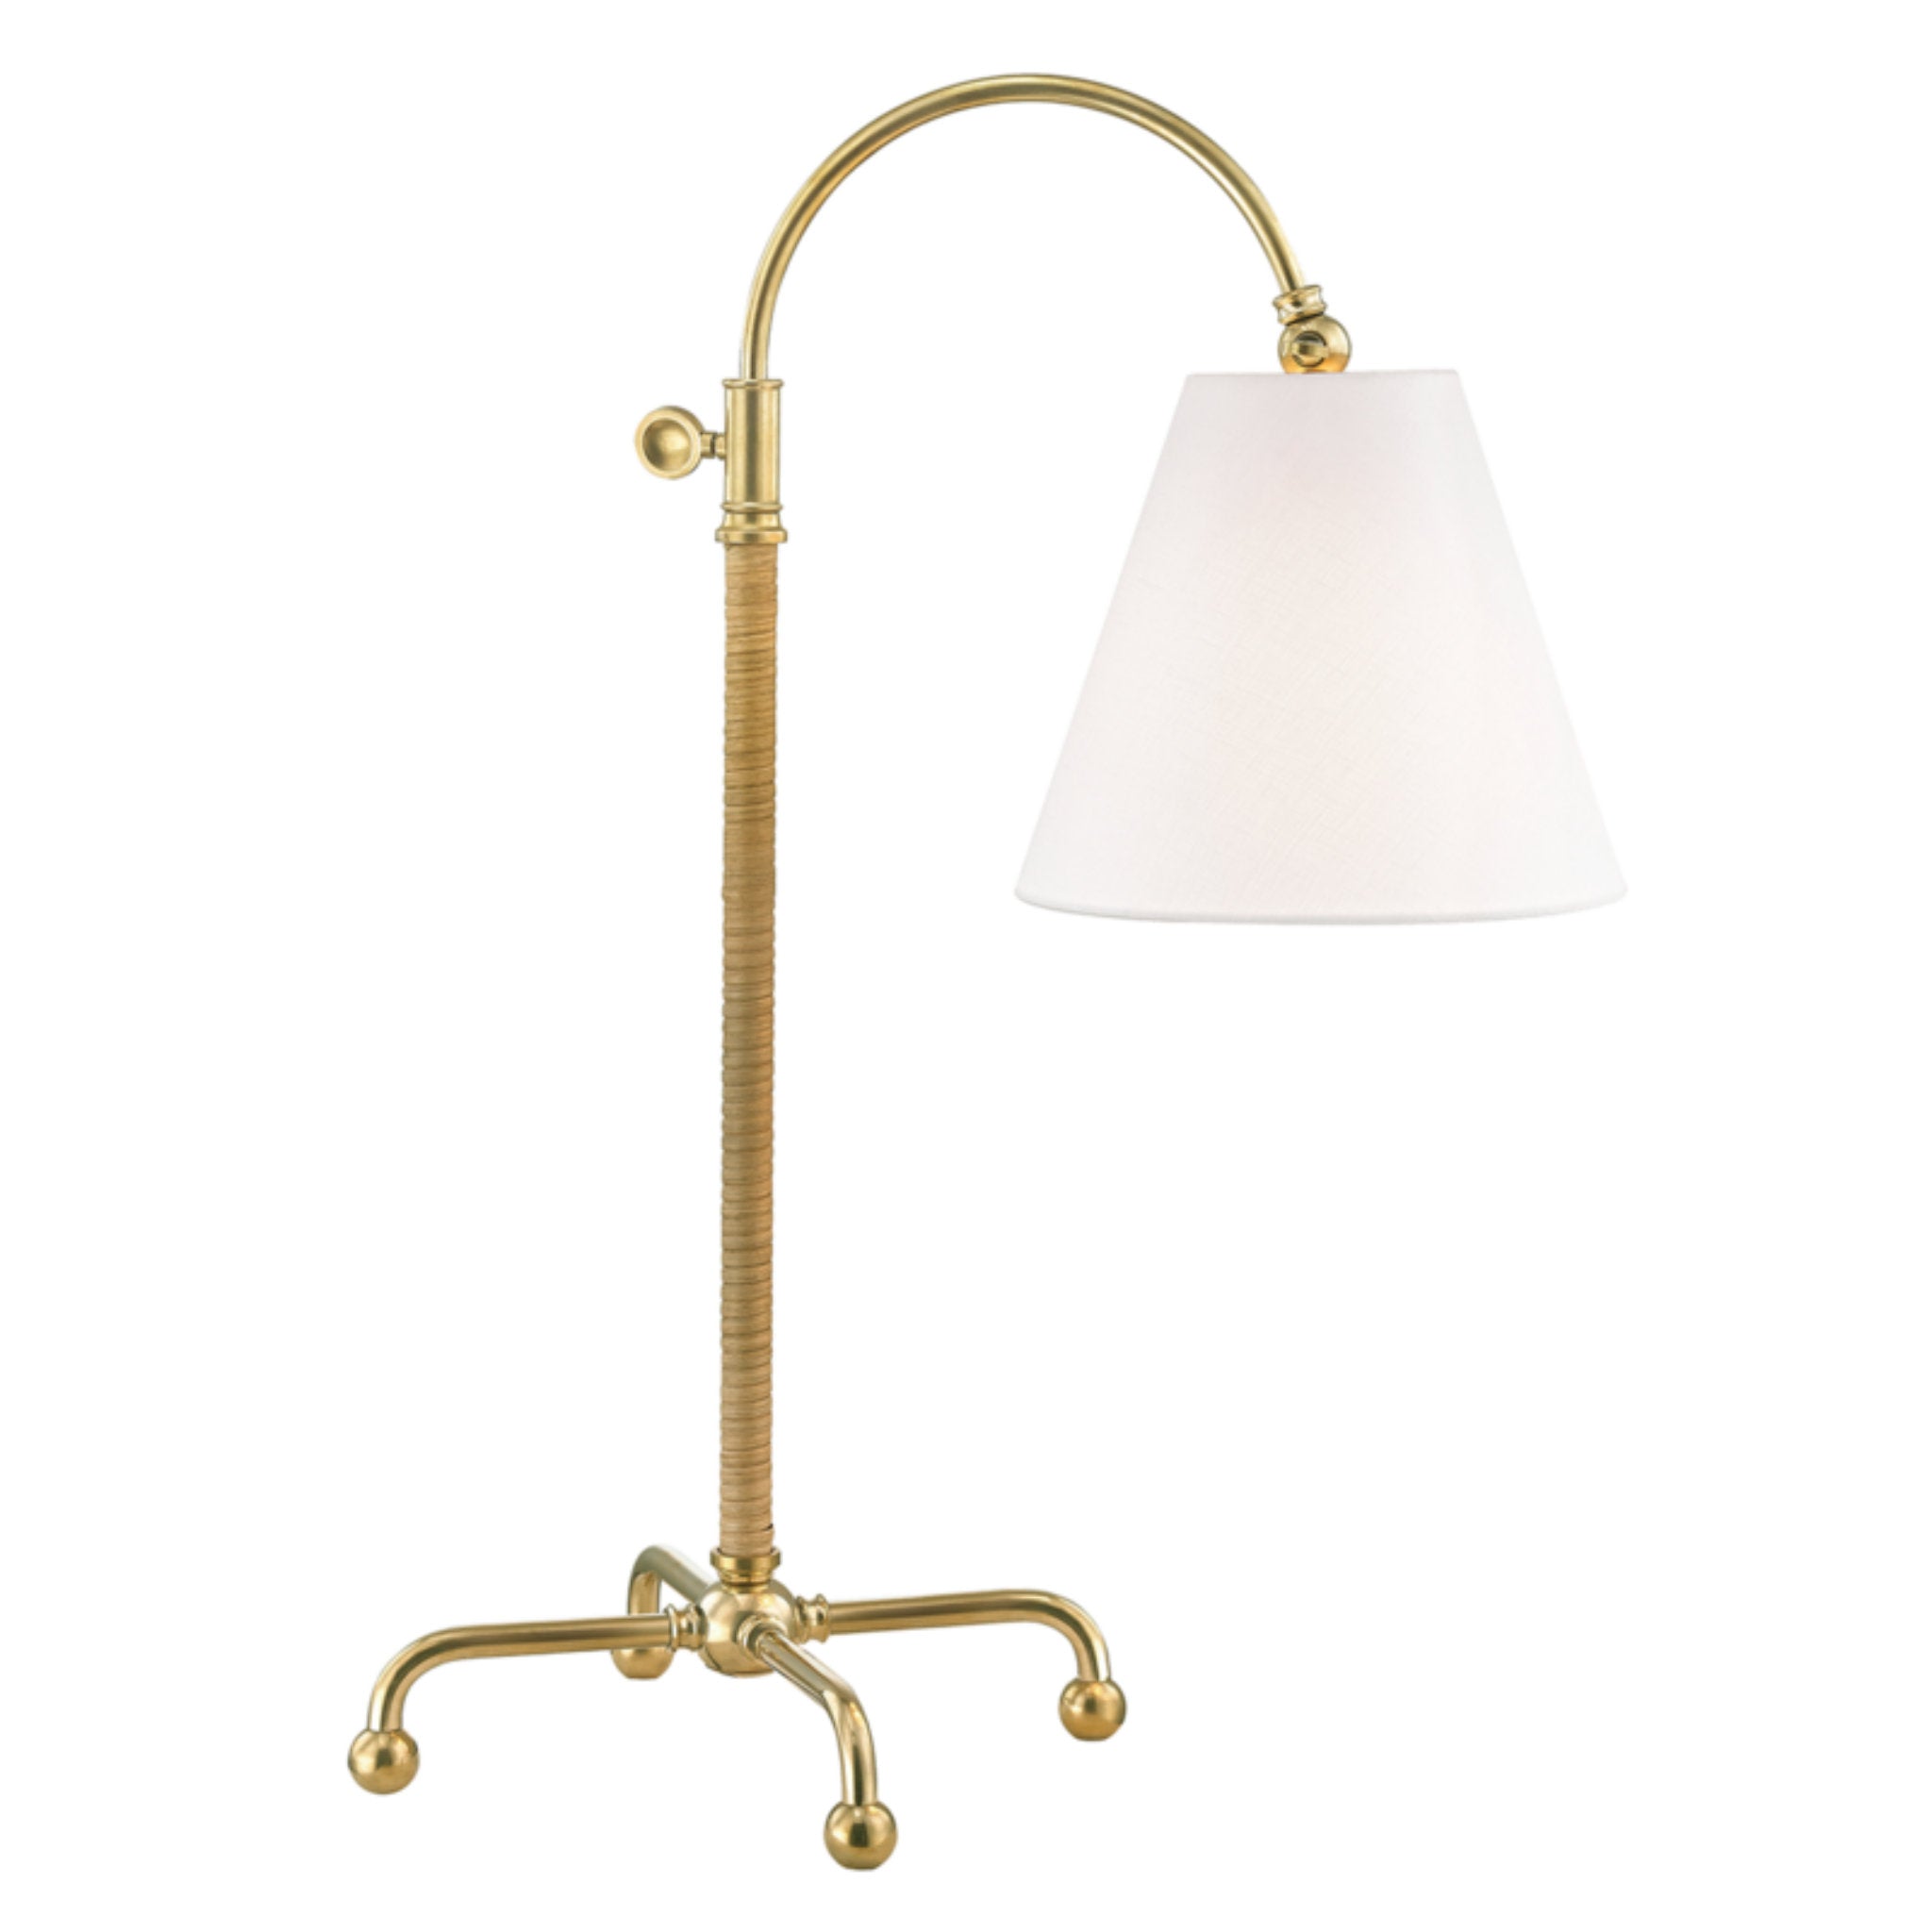 Curves No.1 1 Light Table Lamp in Aged Brass by Mark D. Sikes